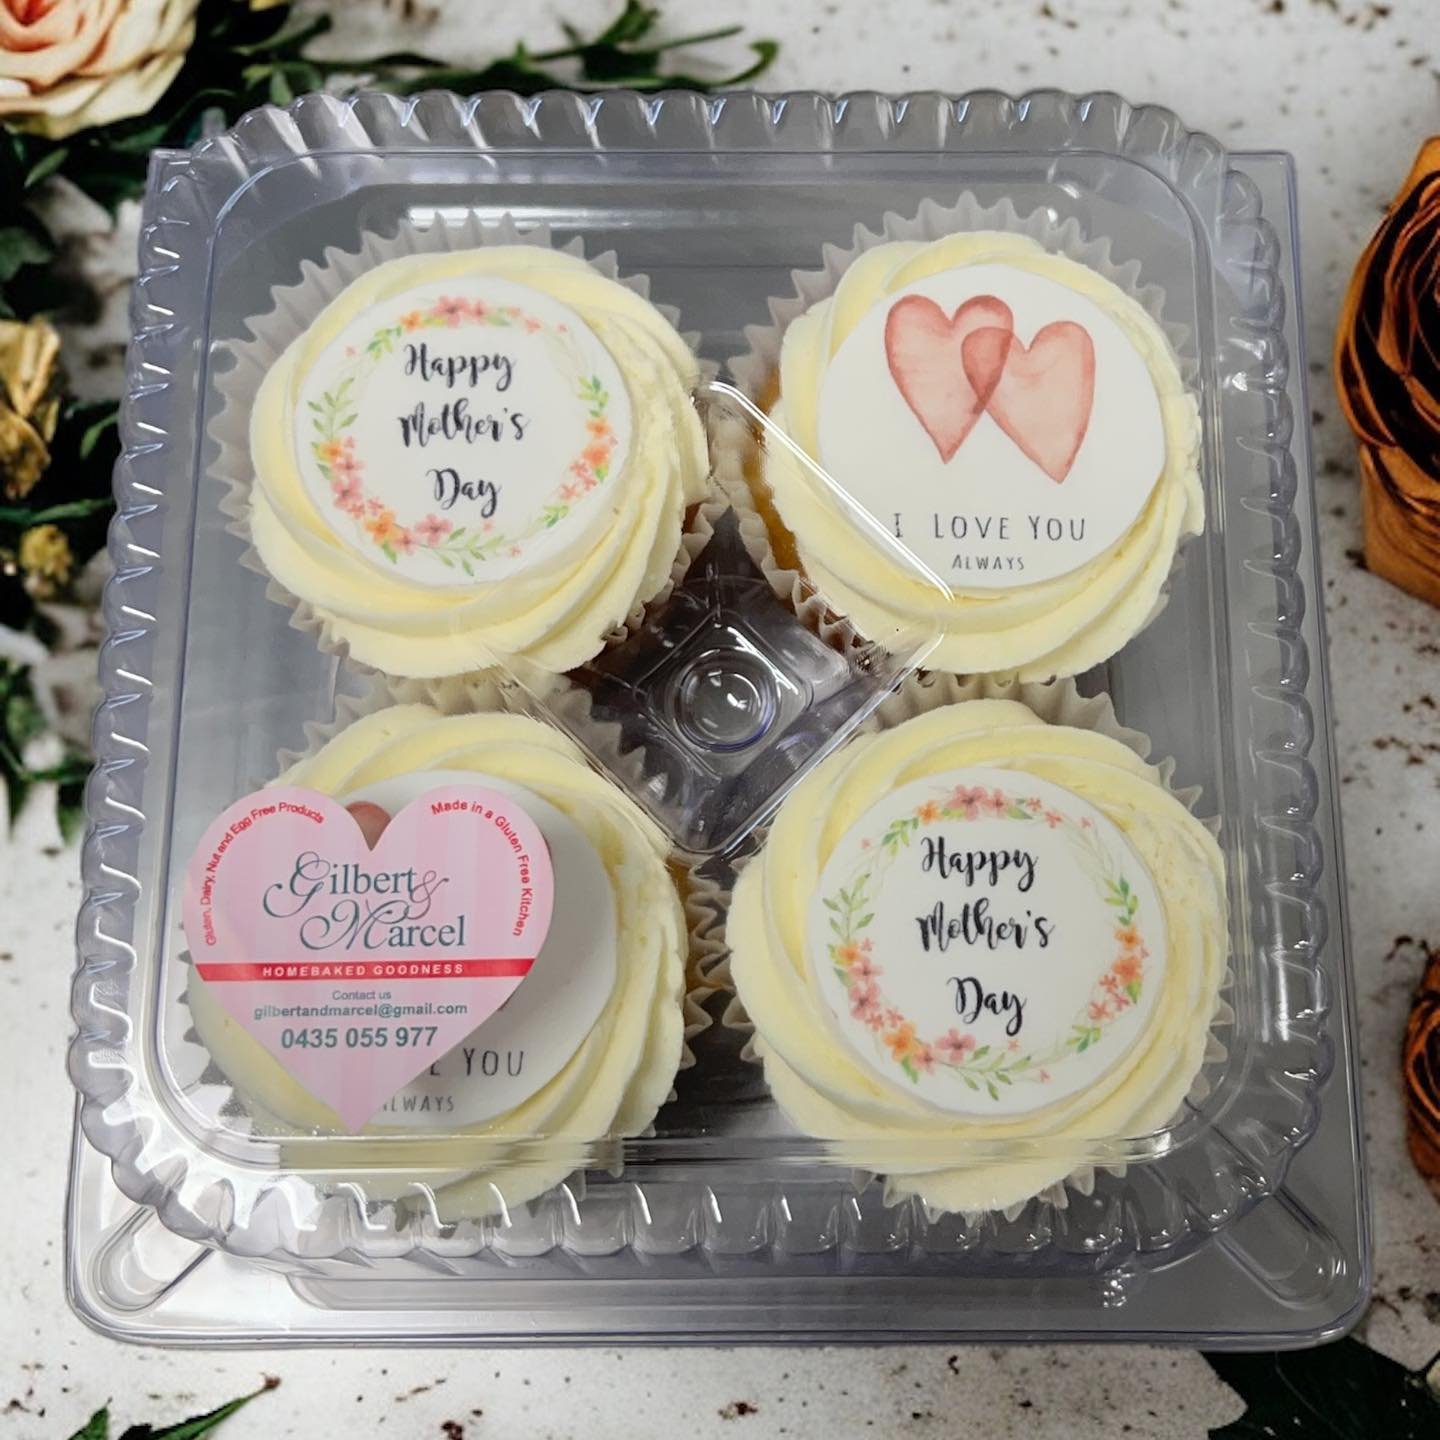 Mother&rsquo;s Day Cupcakes, the perfect sweet treat for mum! (Or Mother figures in your life!) 🧁🌸💗😊
These cupcakes are Vegan &amp; Gluten free, and it&rsquo;s not too late to order to collect for Friday 10/5 😊

These will be more than okay to l